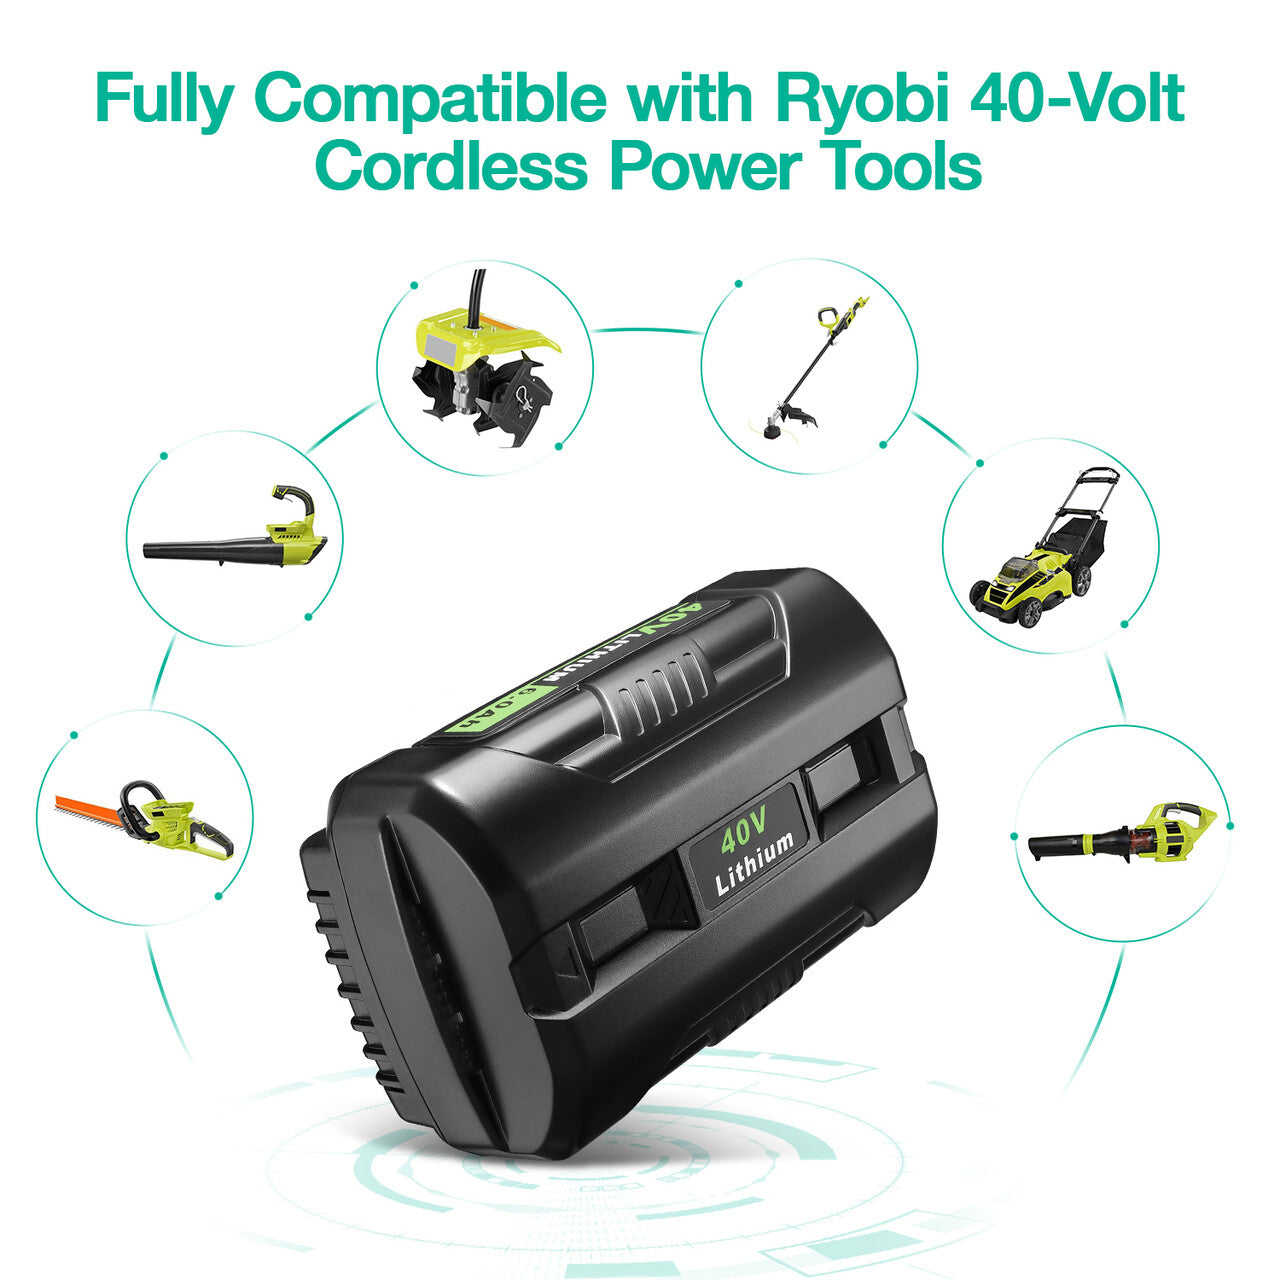 6.0Ah Lithium Battery Compatible with Ryobi 40-Volt Cordless Power Tools